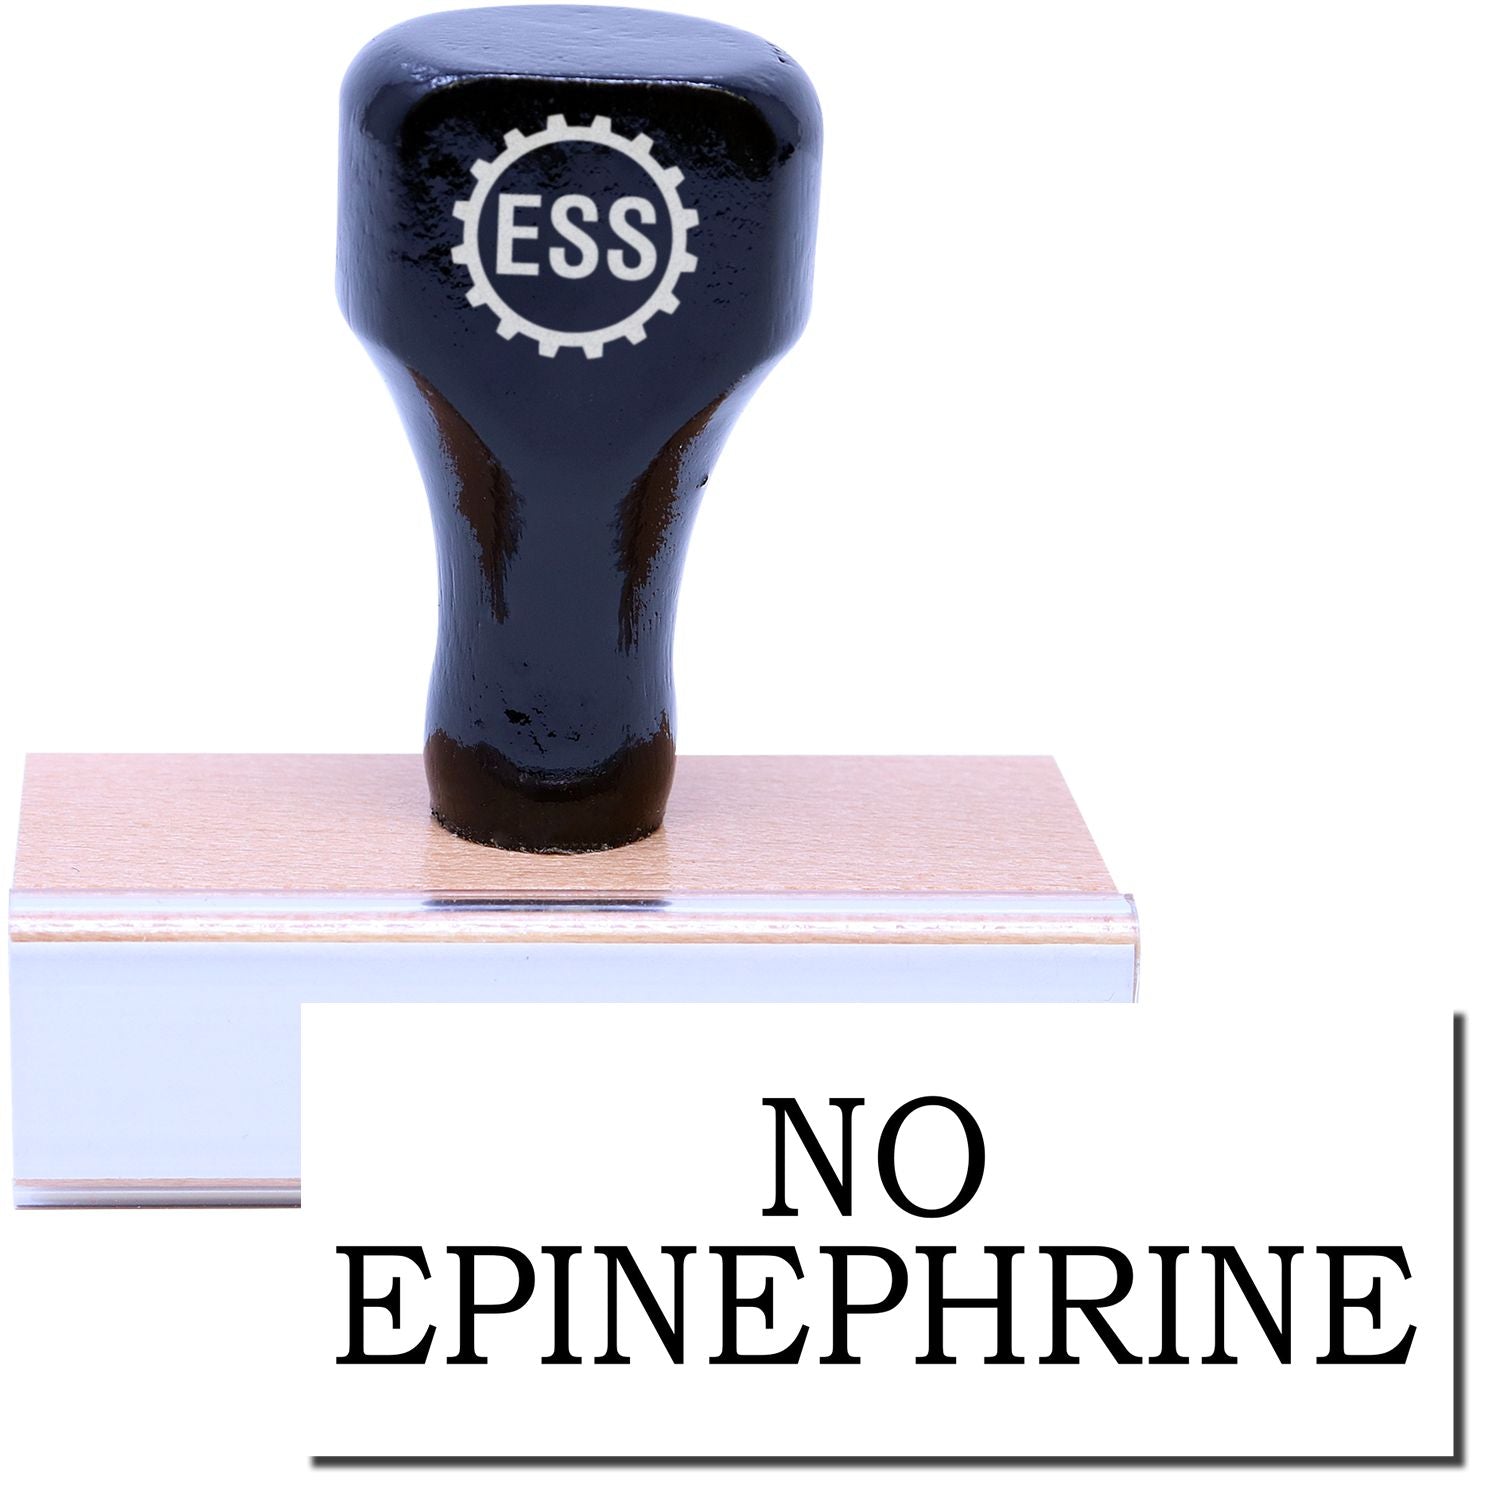 A stock office rubber stamp with a stamped image showing how the text "NO EPINEPHRINE" in a large font is displayed after stamping.